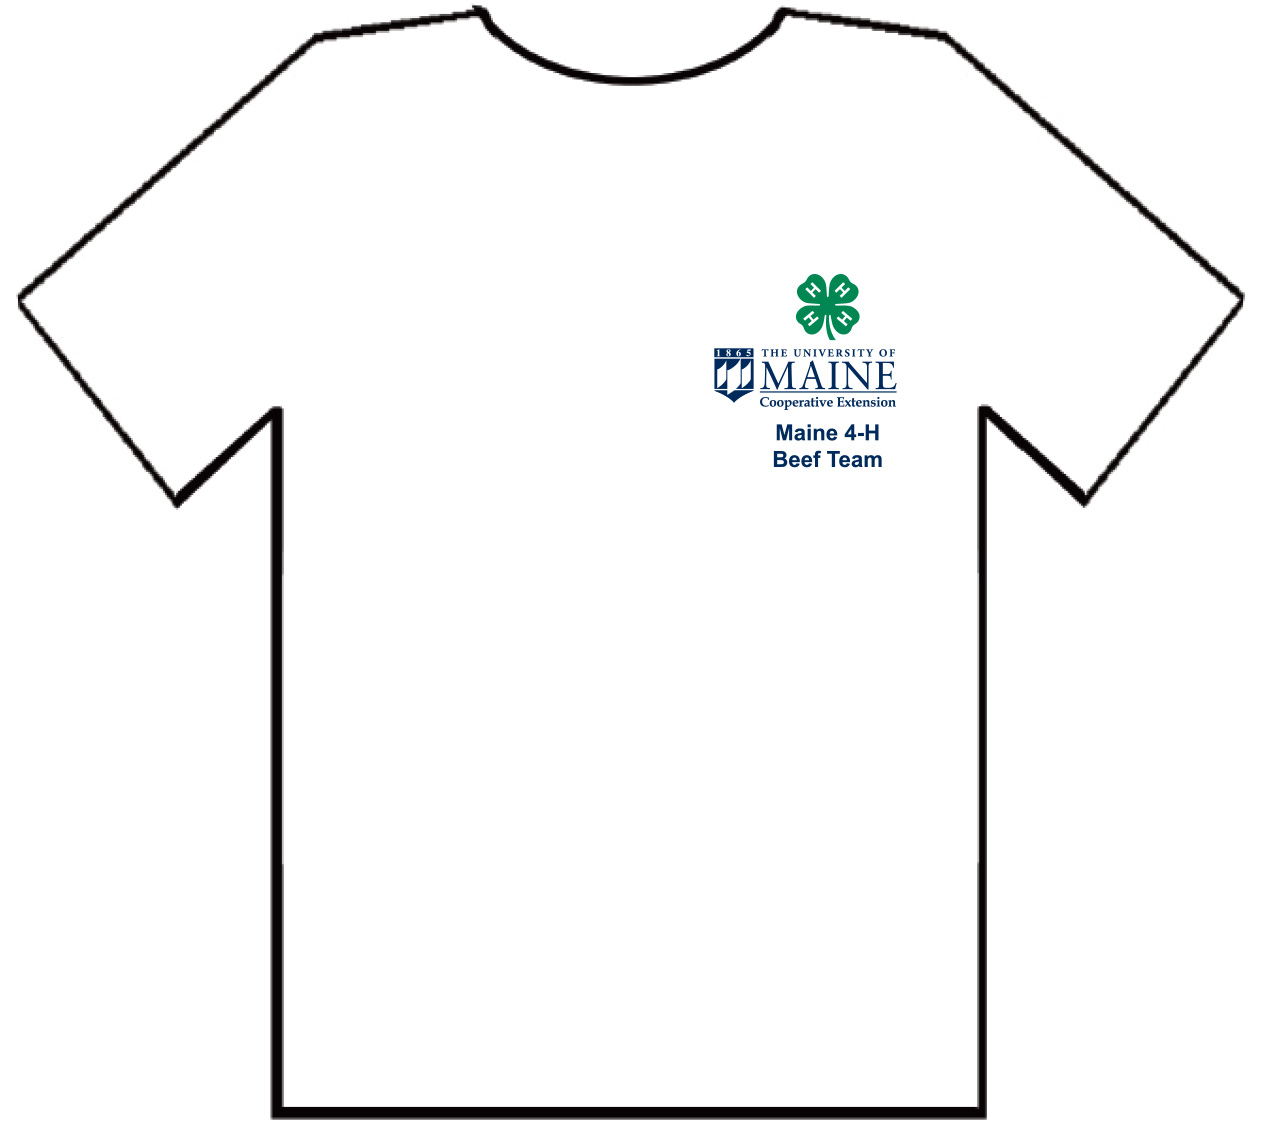 T-shirt Designs | Plugged In: For UMaine Extension Staff ... - ClipArt ...